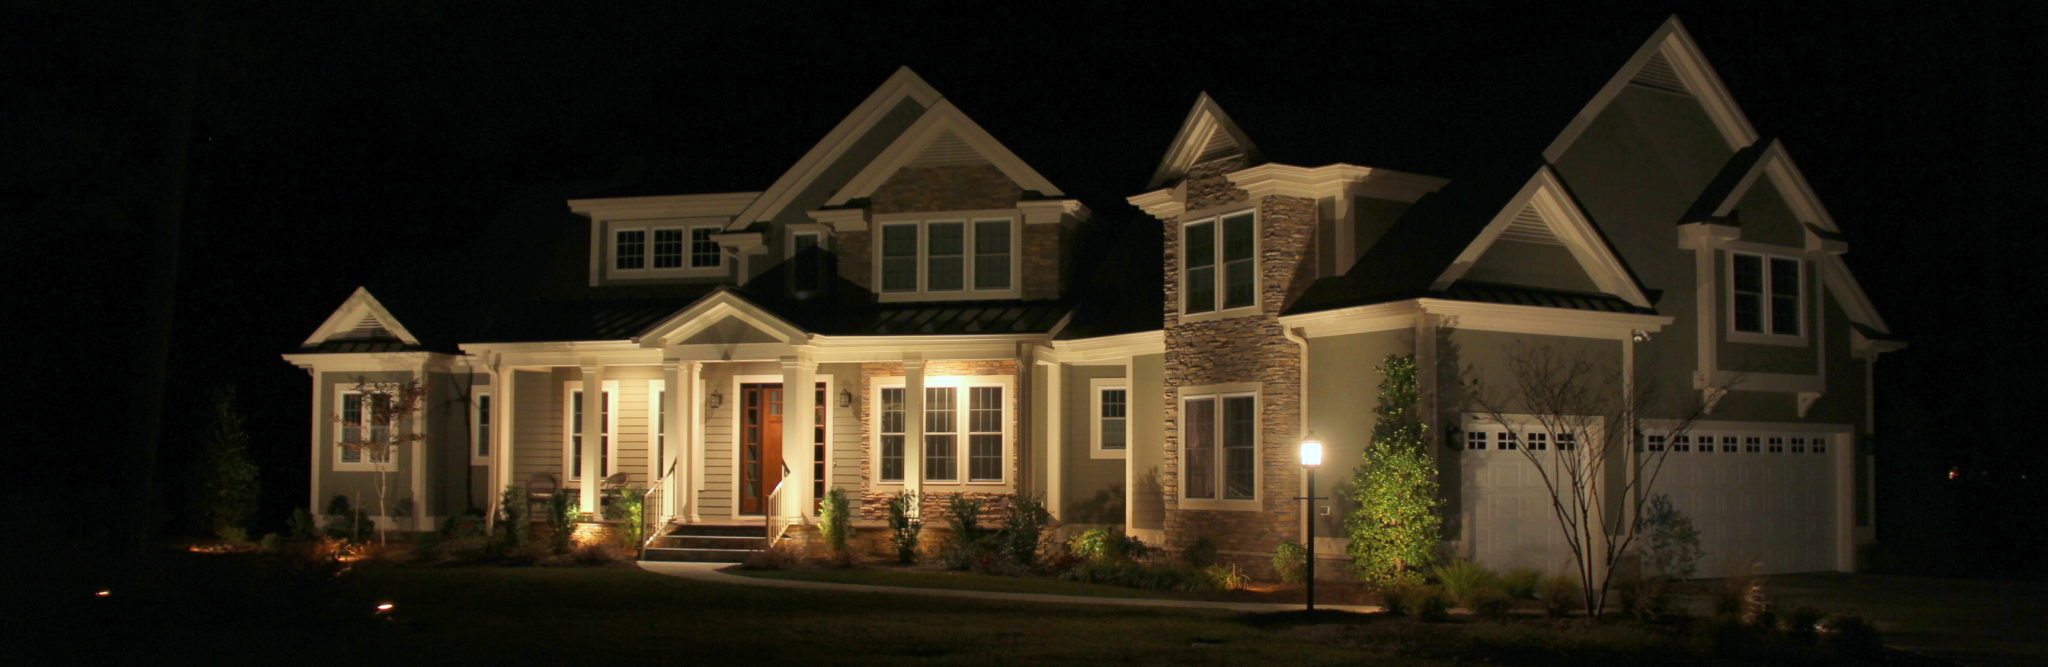 Tips for Finding the Best Outdoor Lighting Company in Your Area